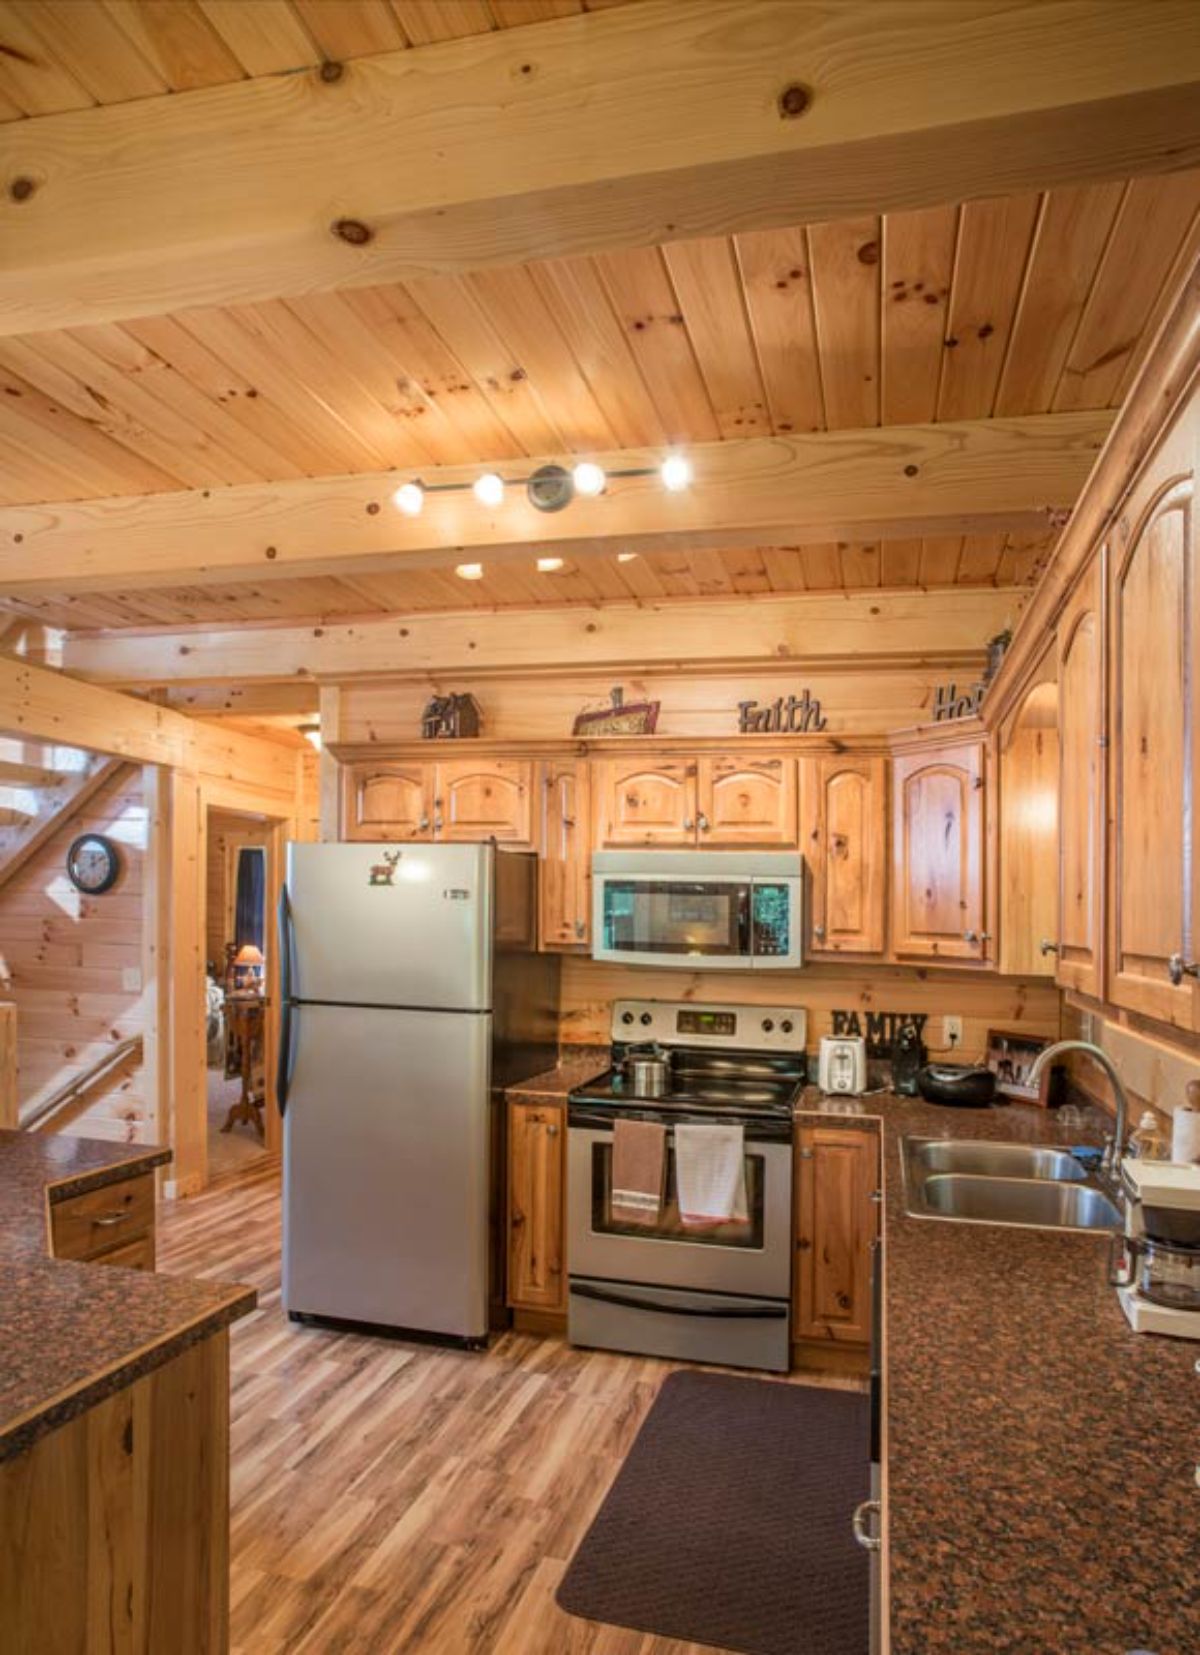 stainless steel refrigerator and stove against back wall of log cabin